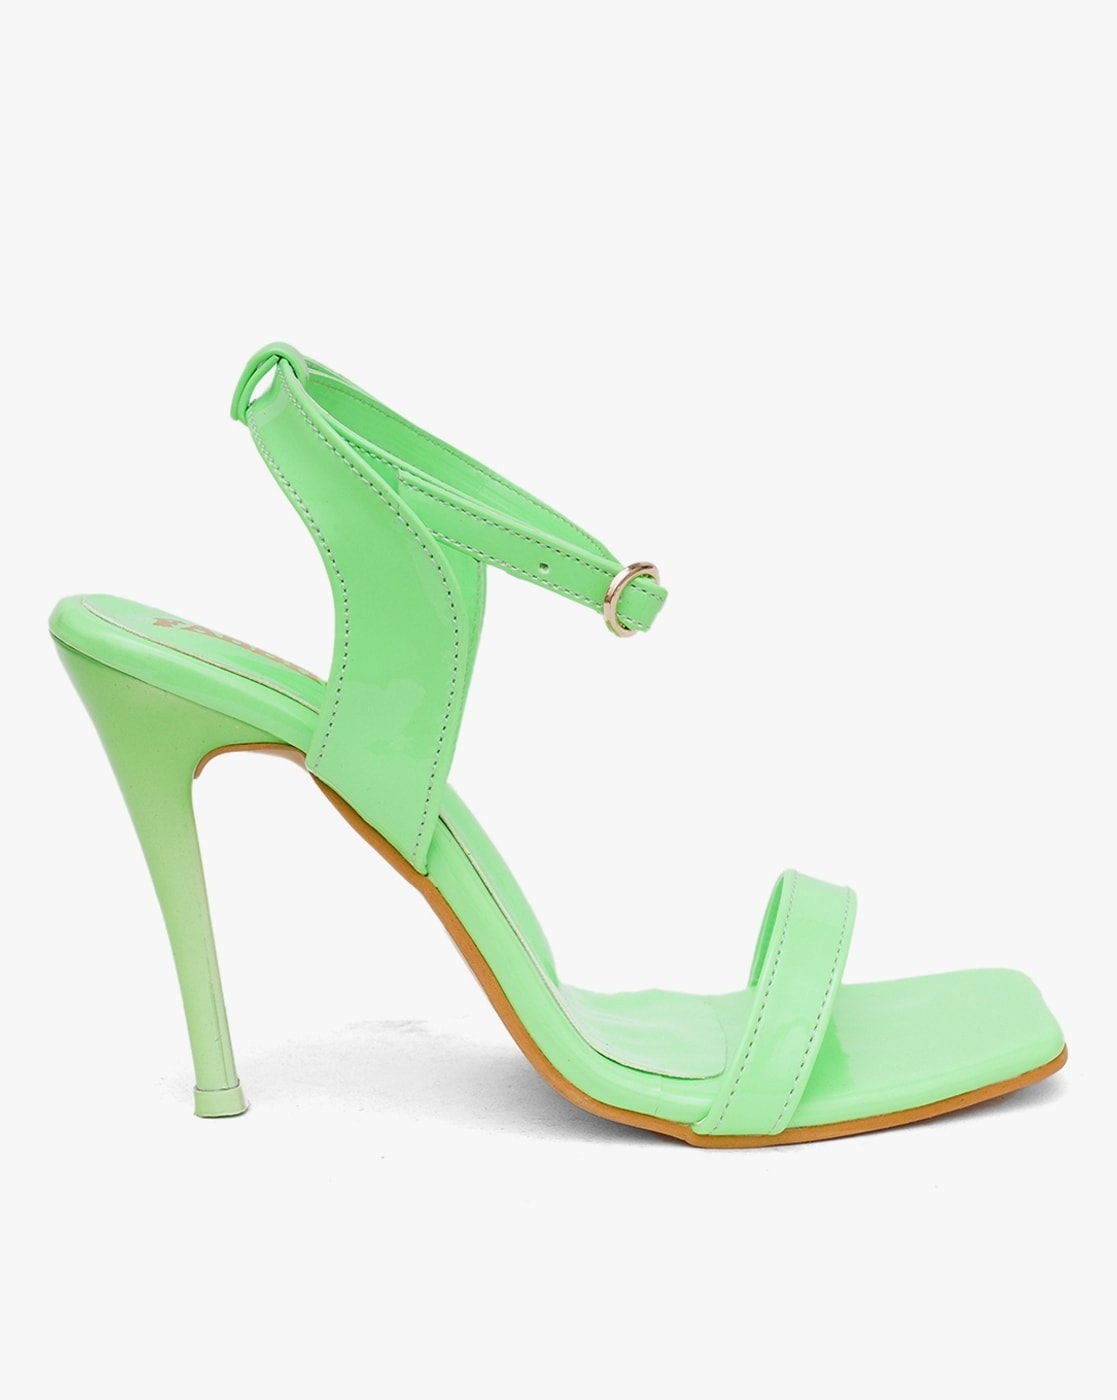 Woman's pump with sidecut in fluorescent green leather heel 8